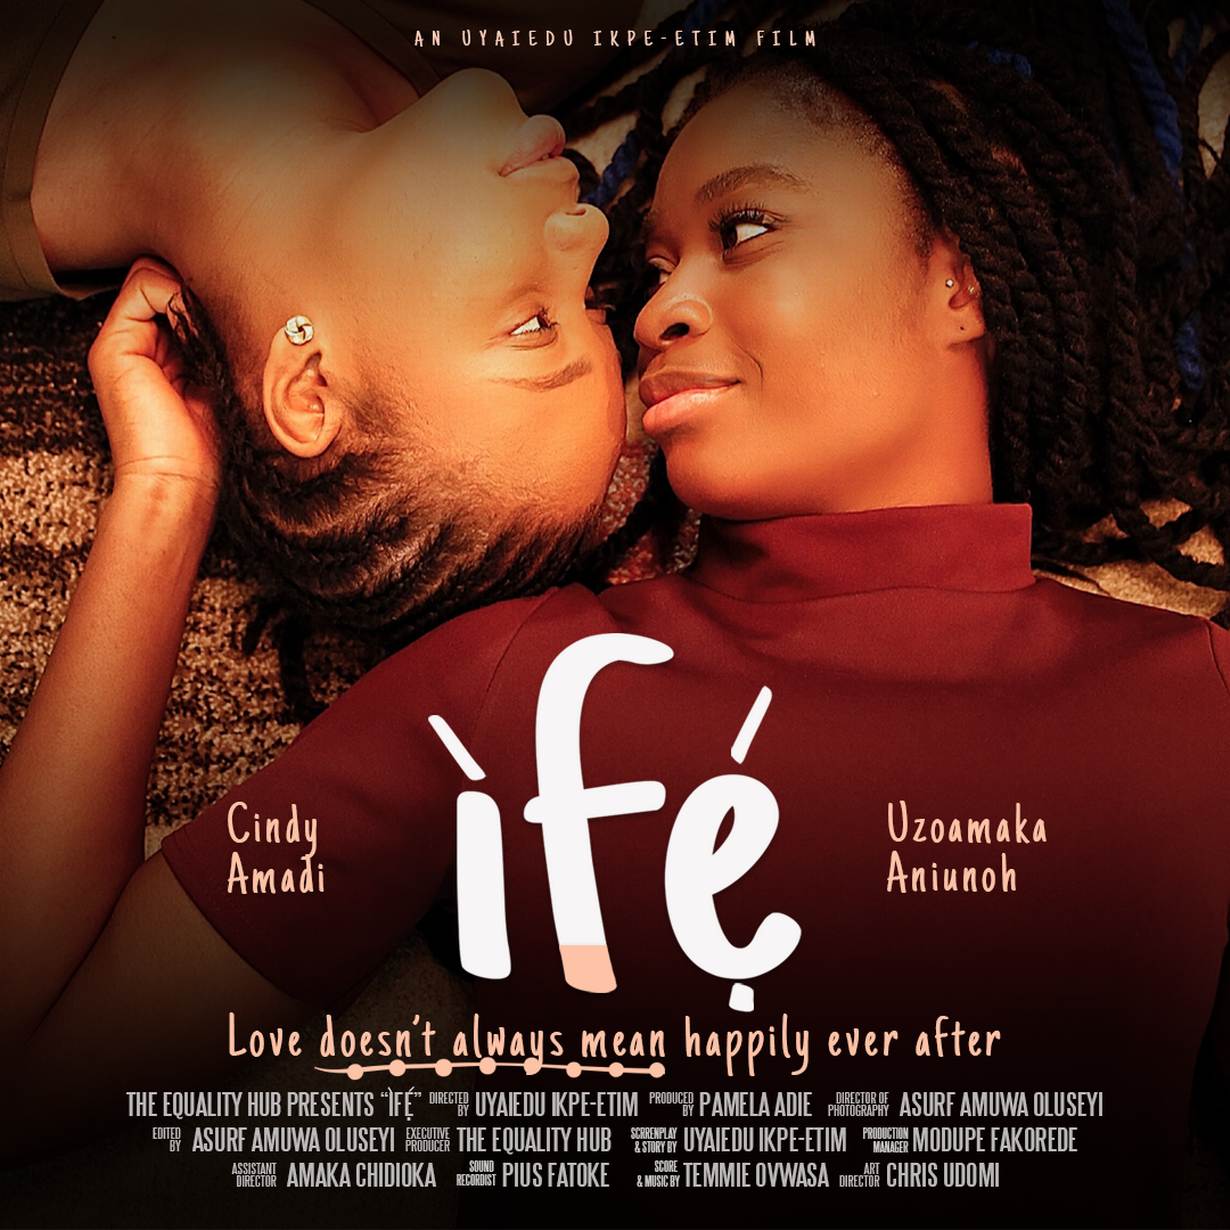 Nigerians First Lesbian Love Story Goes Online To Beat Film Censors Openly 